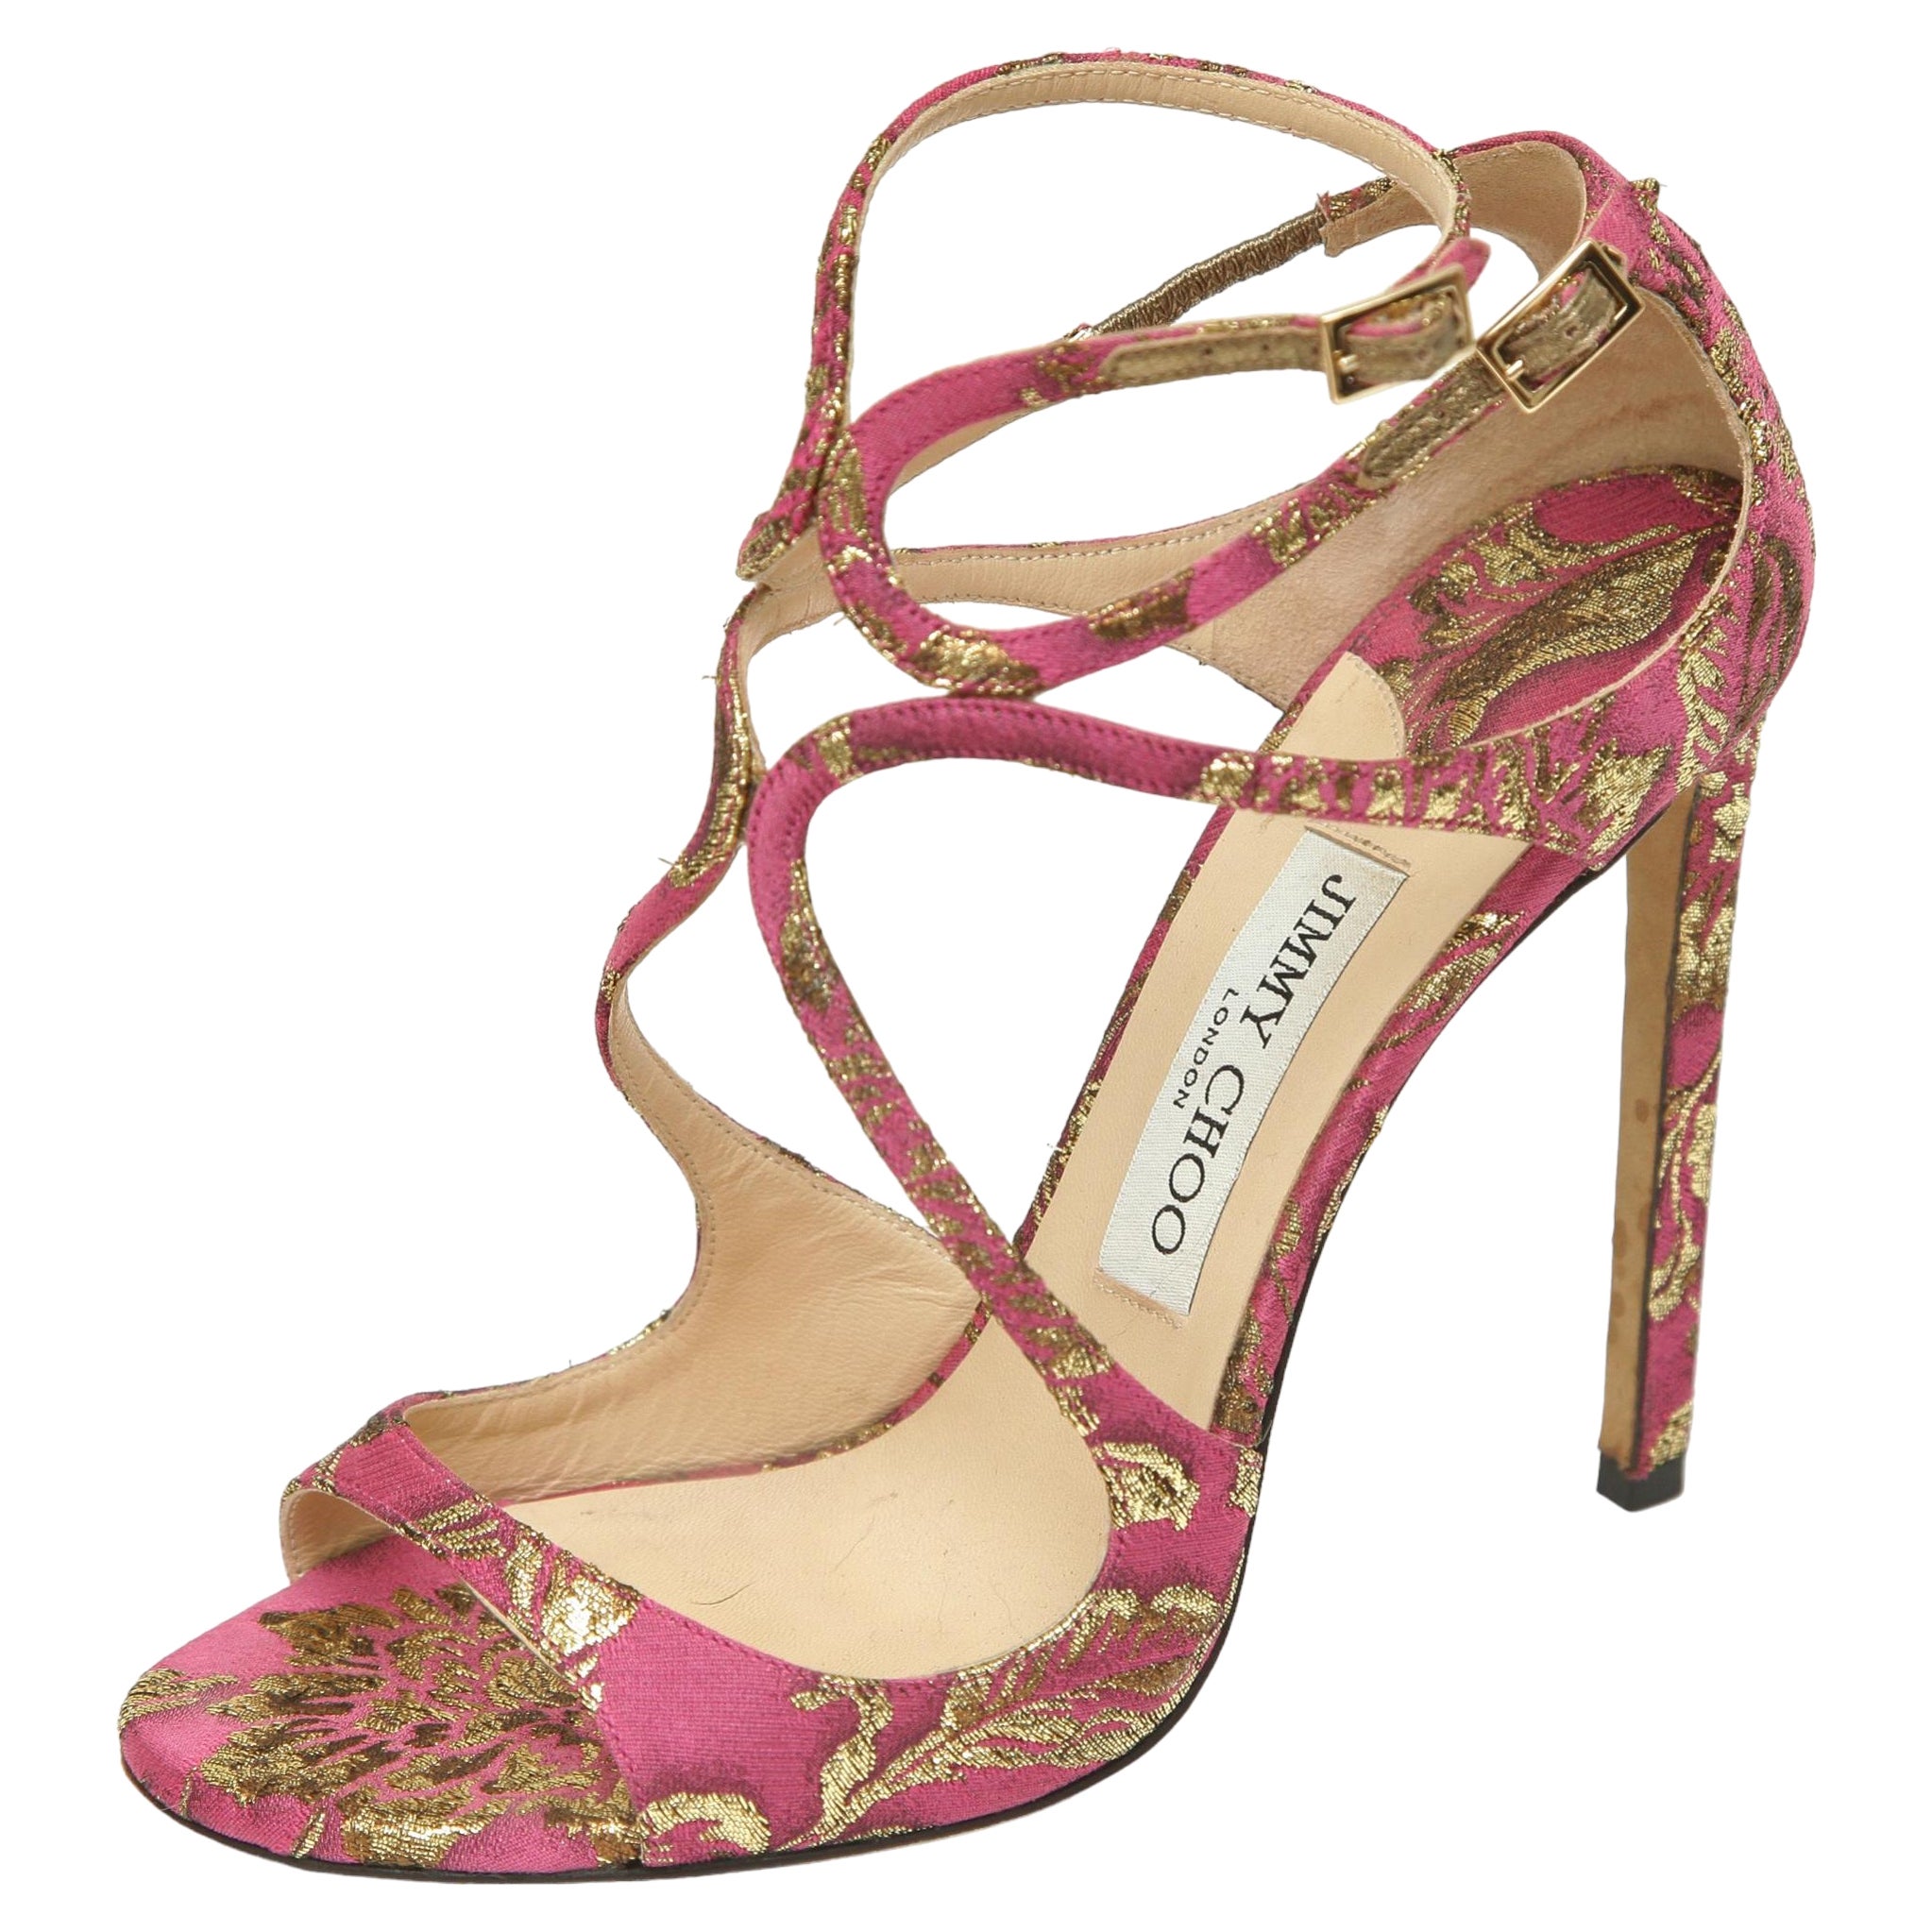 JIMMY CHOO Sandals Brocade Pink Gold Metallic LANCER Heels Leather Strappy 38 For Sale